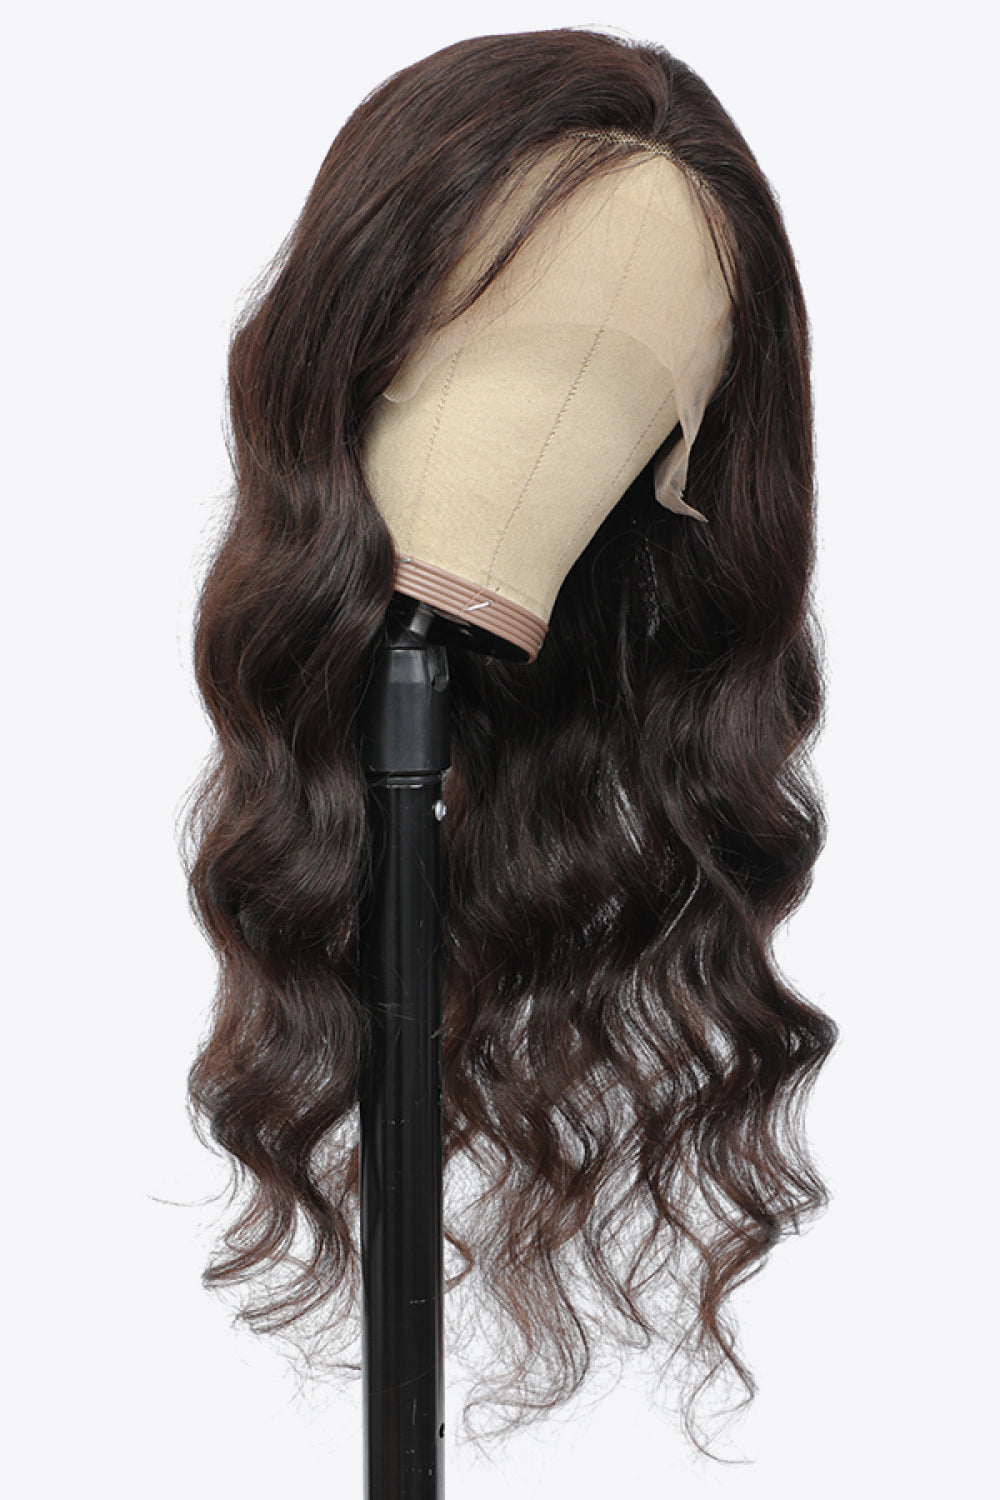 20" 13x4 Lace Front Wigs Body Wave Human Virgin Hair Natural Color 150% Density by TC